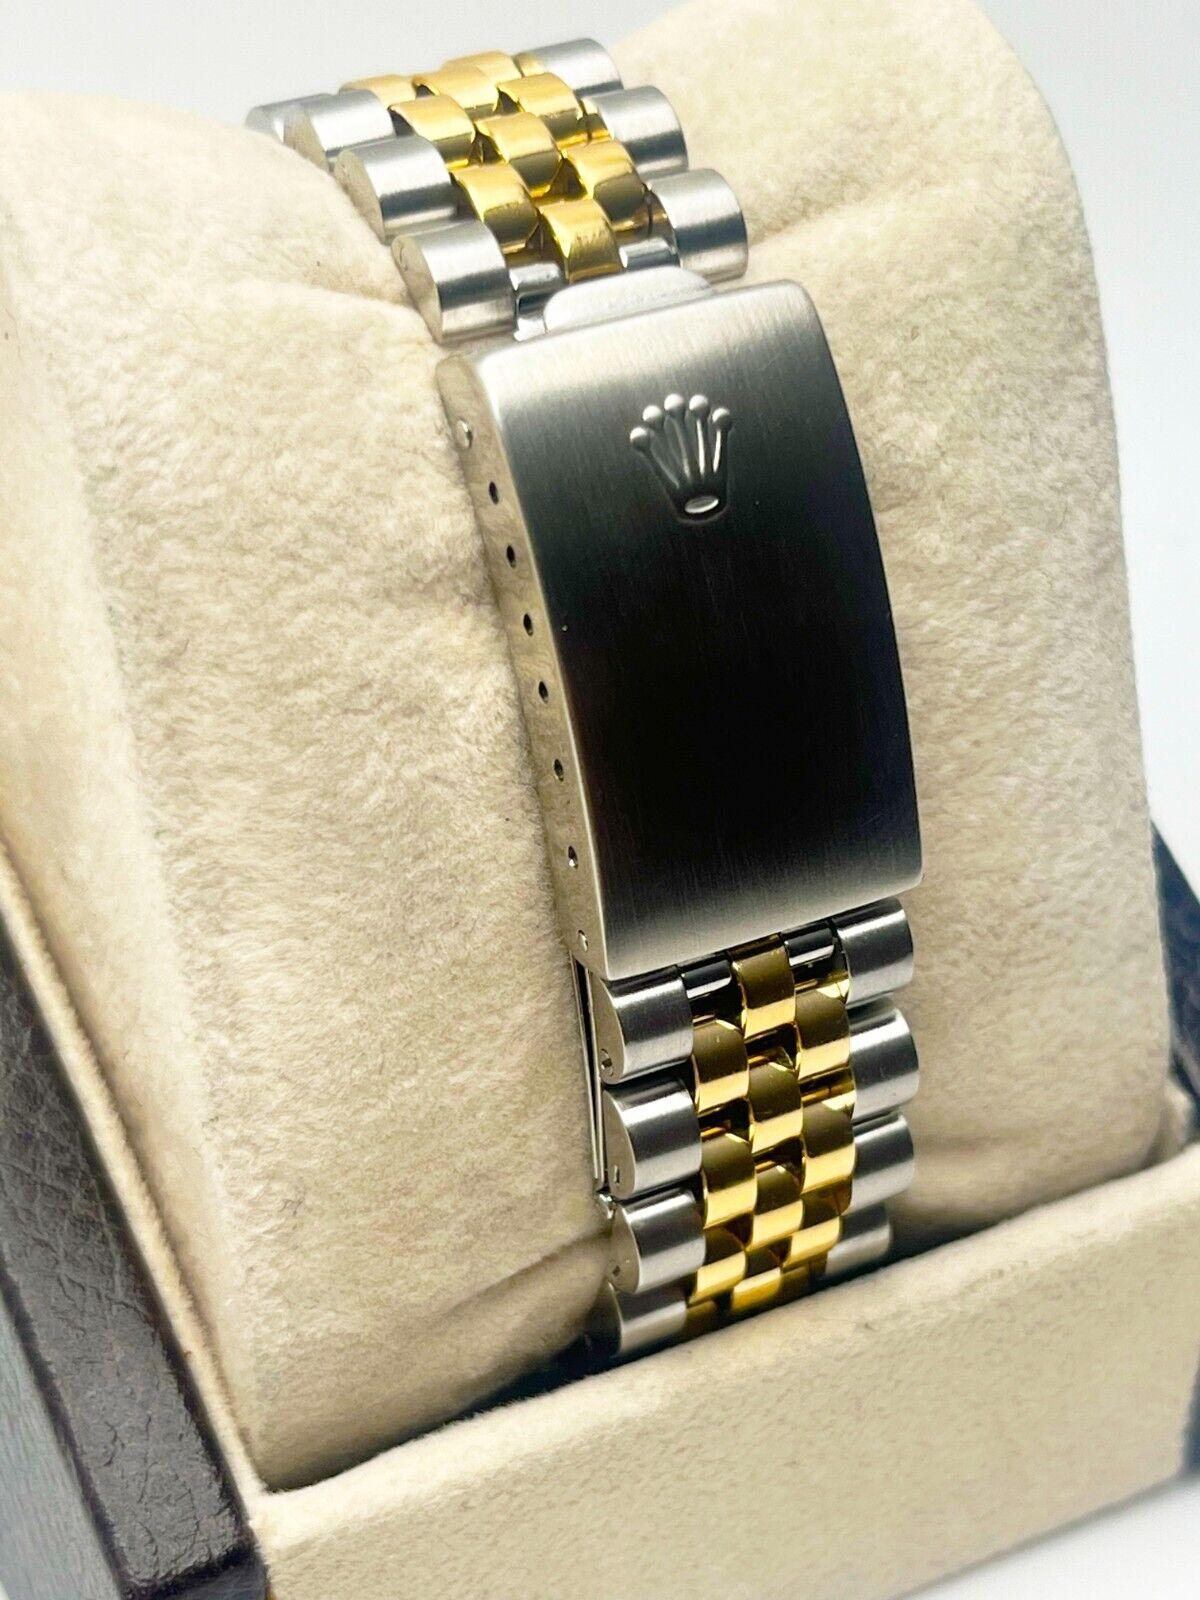 
Style Number: 16233



Serial: X421***



Year: 1991

 

Model: Datejust

 

Case Material: Stainless Steel 

 

Band: 18K Yellow Gold & Stainless Steel 

 

Bezel:  18K Yellow Gold Fluted Bezel 

 

Dial: Champagne Linen Dial 

 

Face: Sapphire